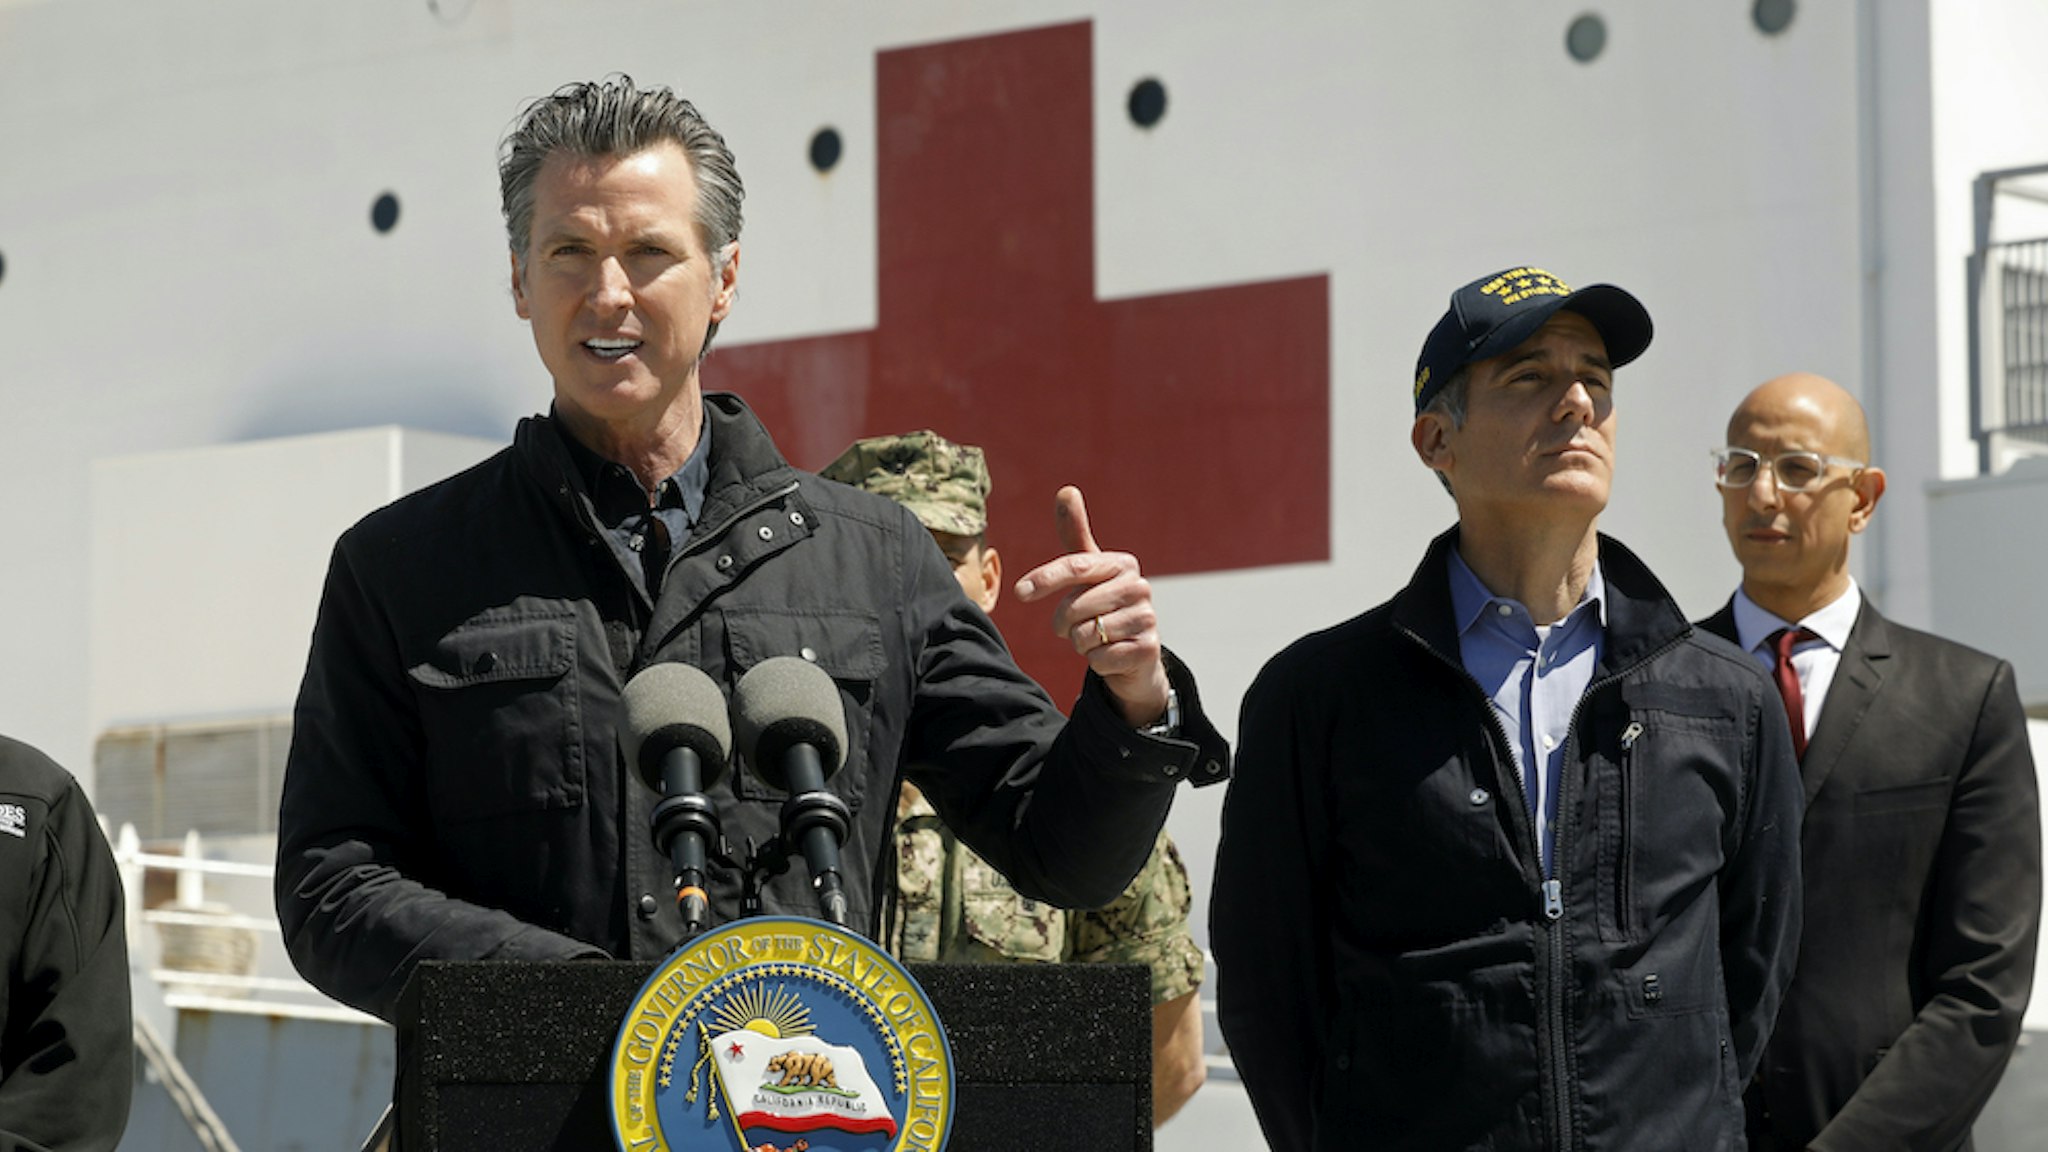 California Governor Gavin Newsom speaks in front of the hospital ship USNS Mercy that arrived into the Port of Los Angeles on Friday, March 27, 2020, to provide relief for Southland hospitals overwhelmed by the coronavirus pandemic. Also attending the press conference were Director Mark Ghilarducci, Cal OES, left, Los Angeles Mayor Eric Garcetti, second from right, and Dr. Mark Ghaly, Secretary of Health and Human Services, far right, along with others not shown. (POOL PHOTOGRAPHS by Carolyn Cole/Los Angeles Times)